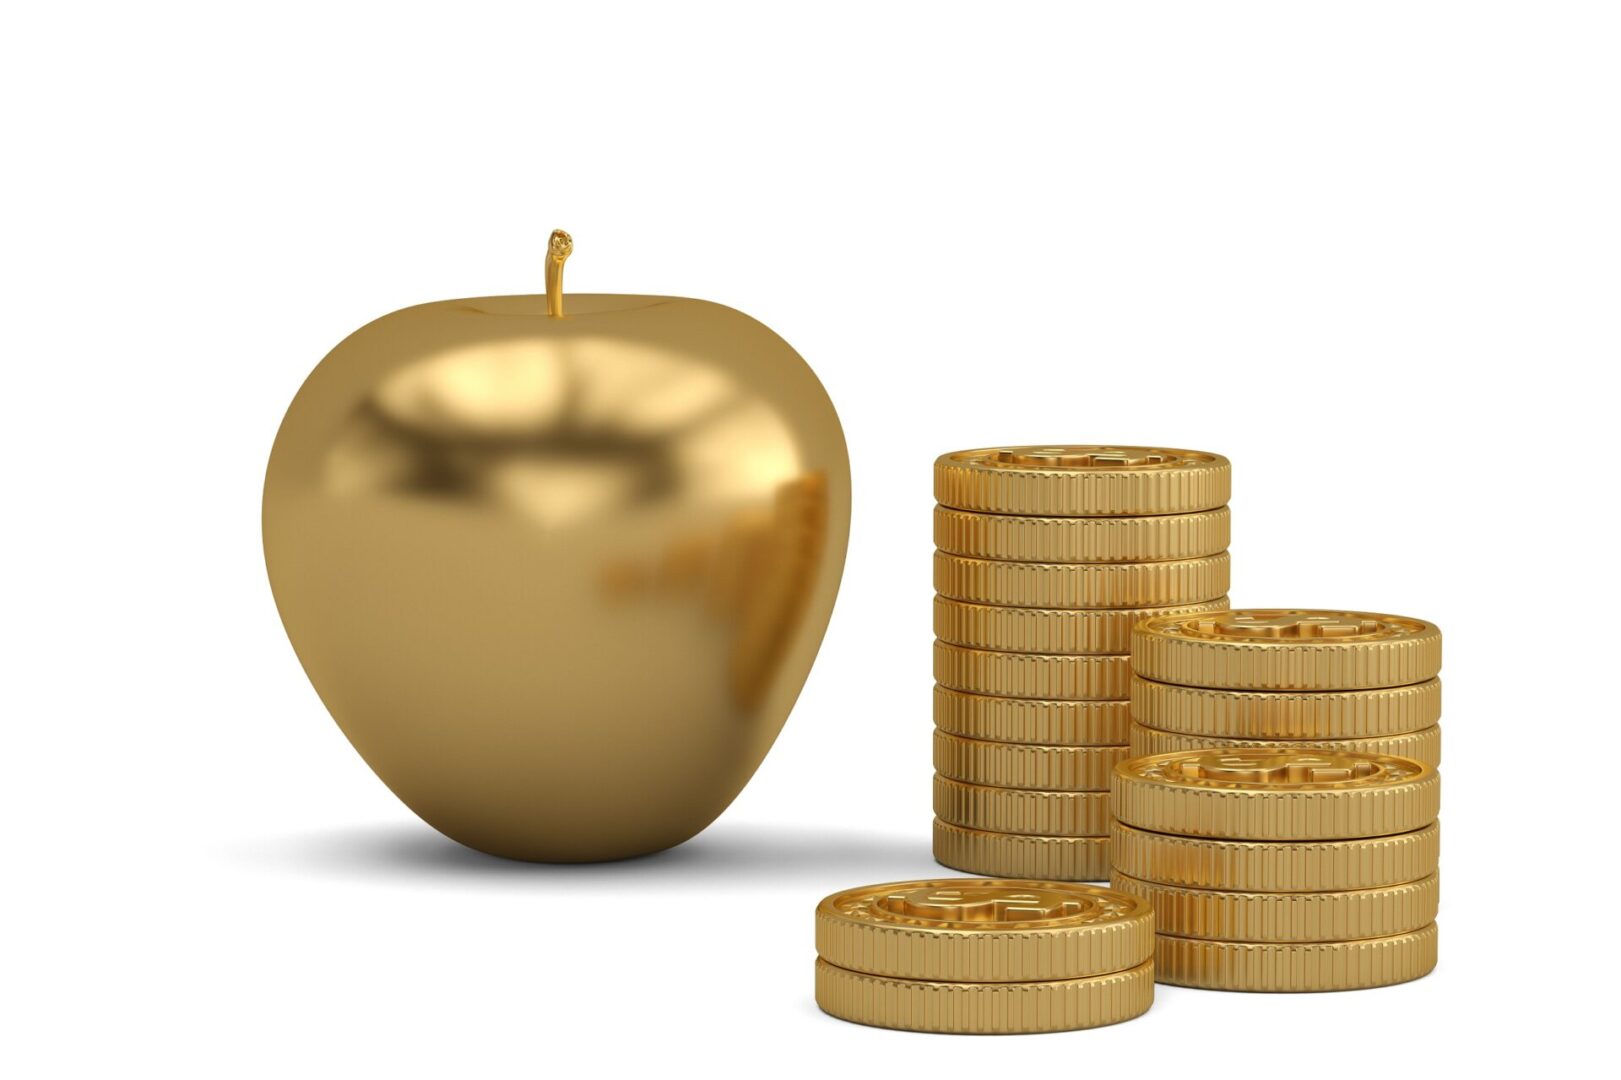 A gold apple sitting next to stacks of coins.